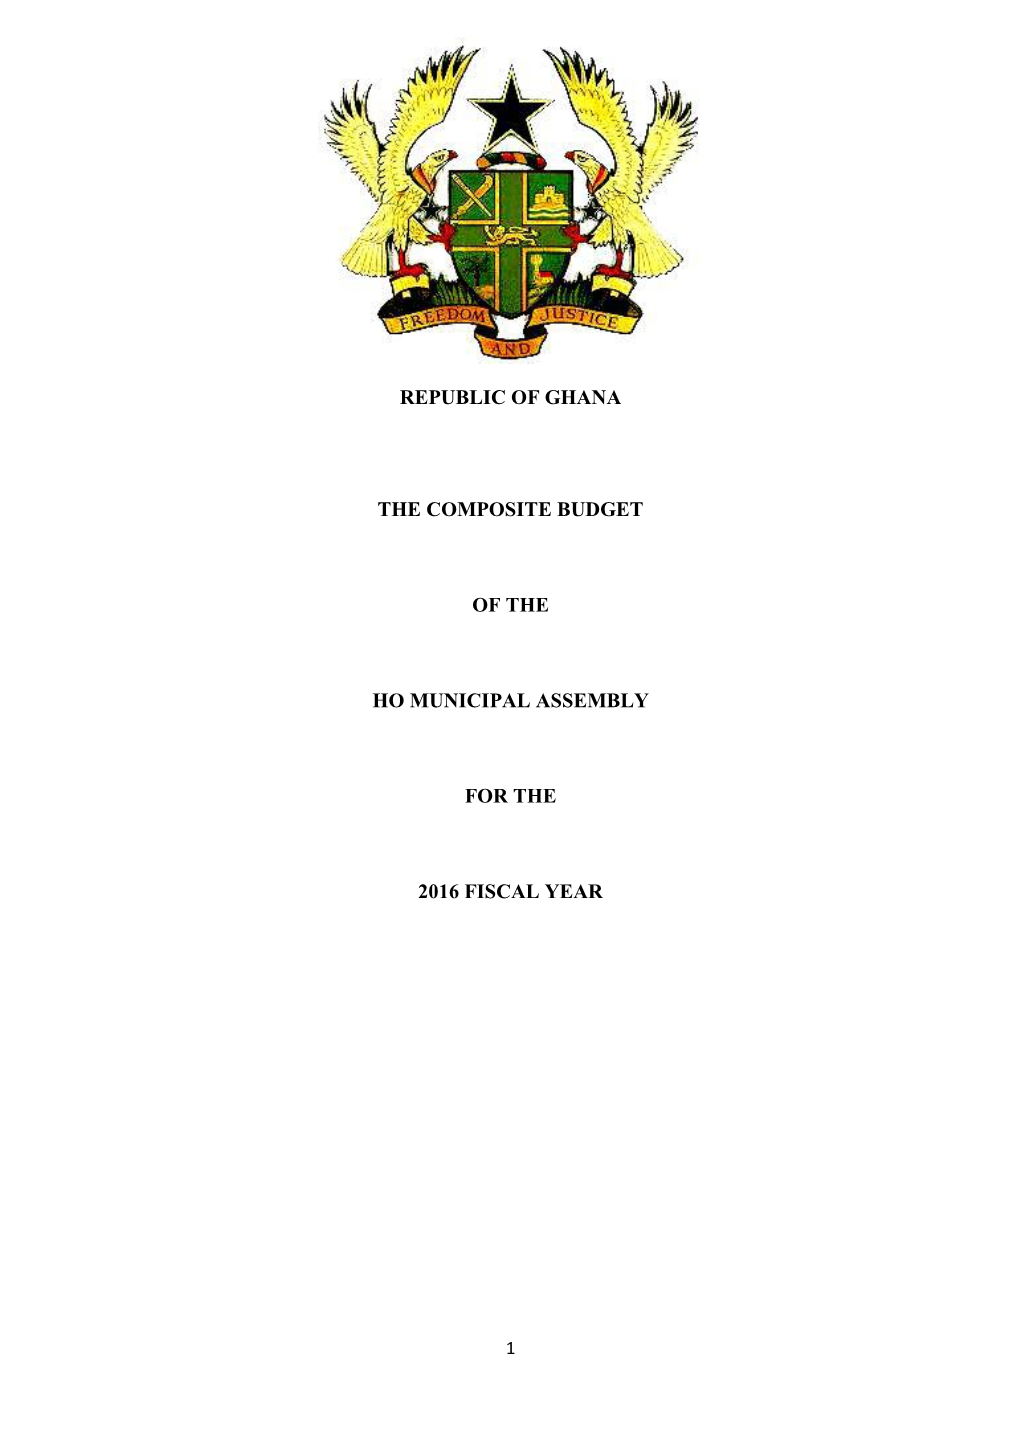 Republic of Ghana the Composite Budget of the Ho Municipal Assembly for the 2016 Fiscal Year